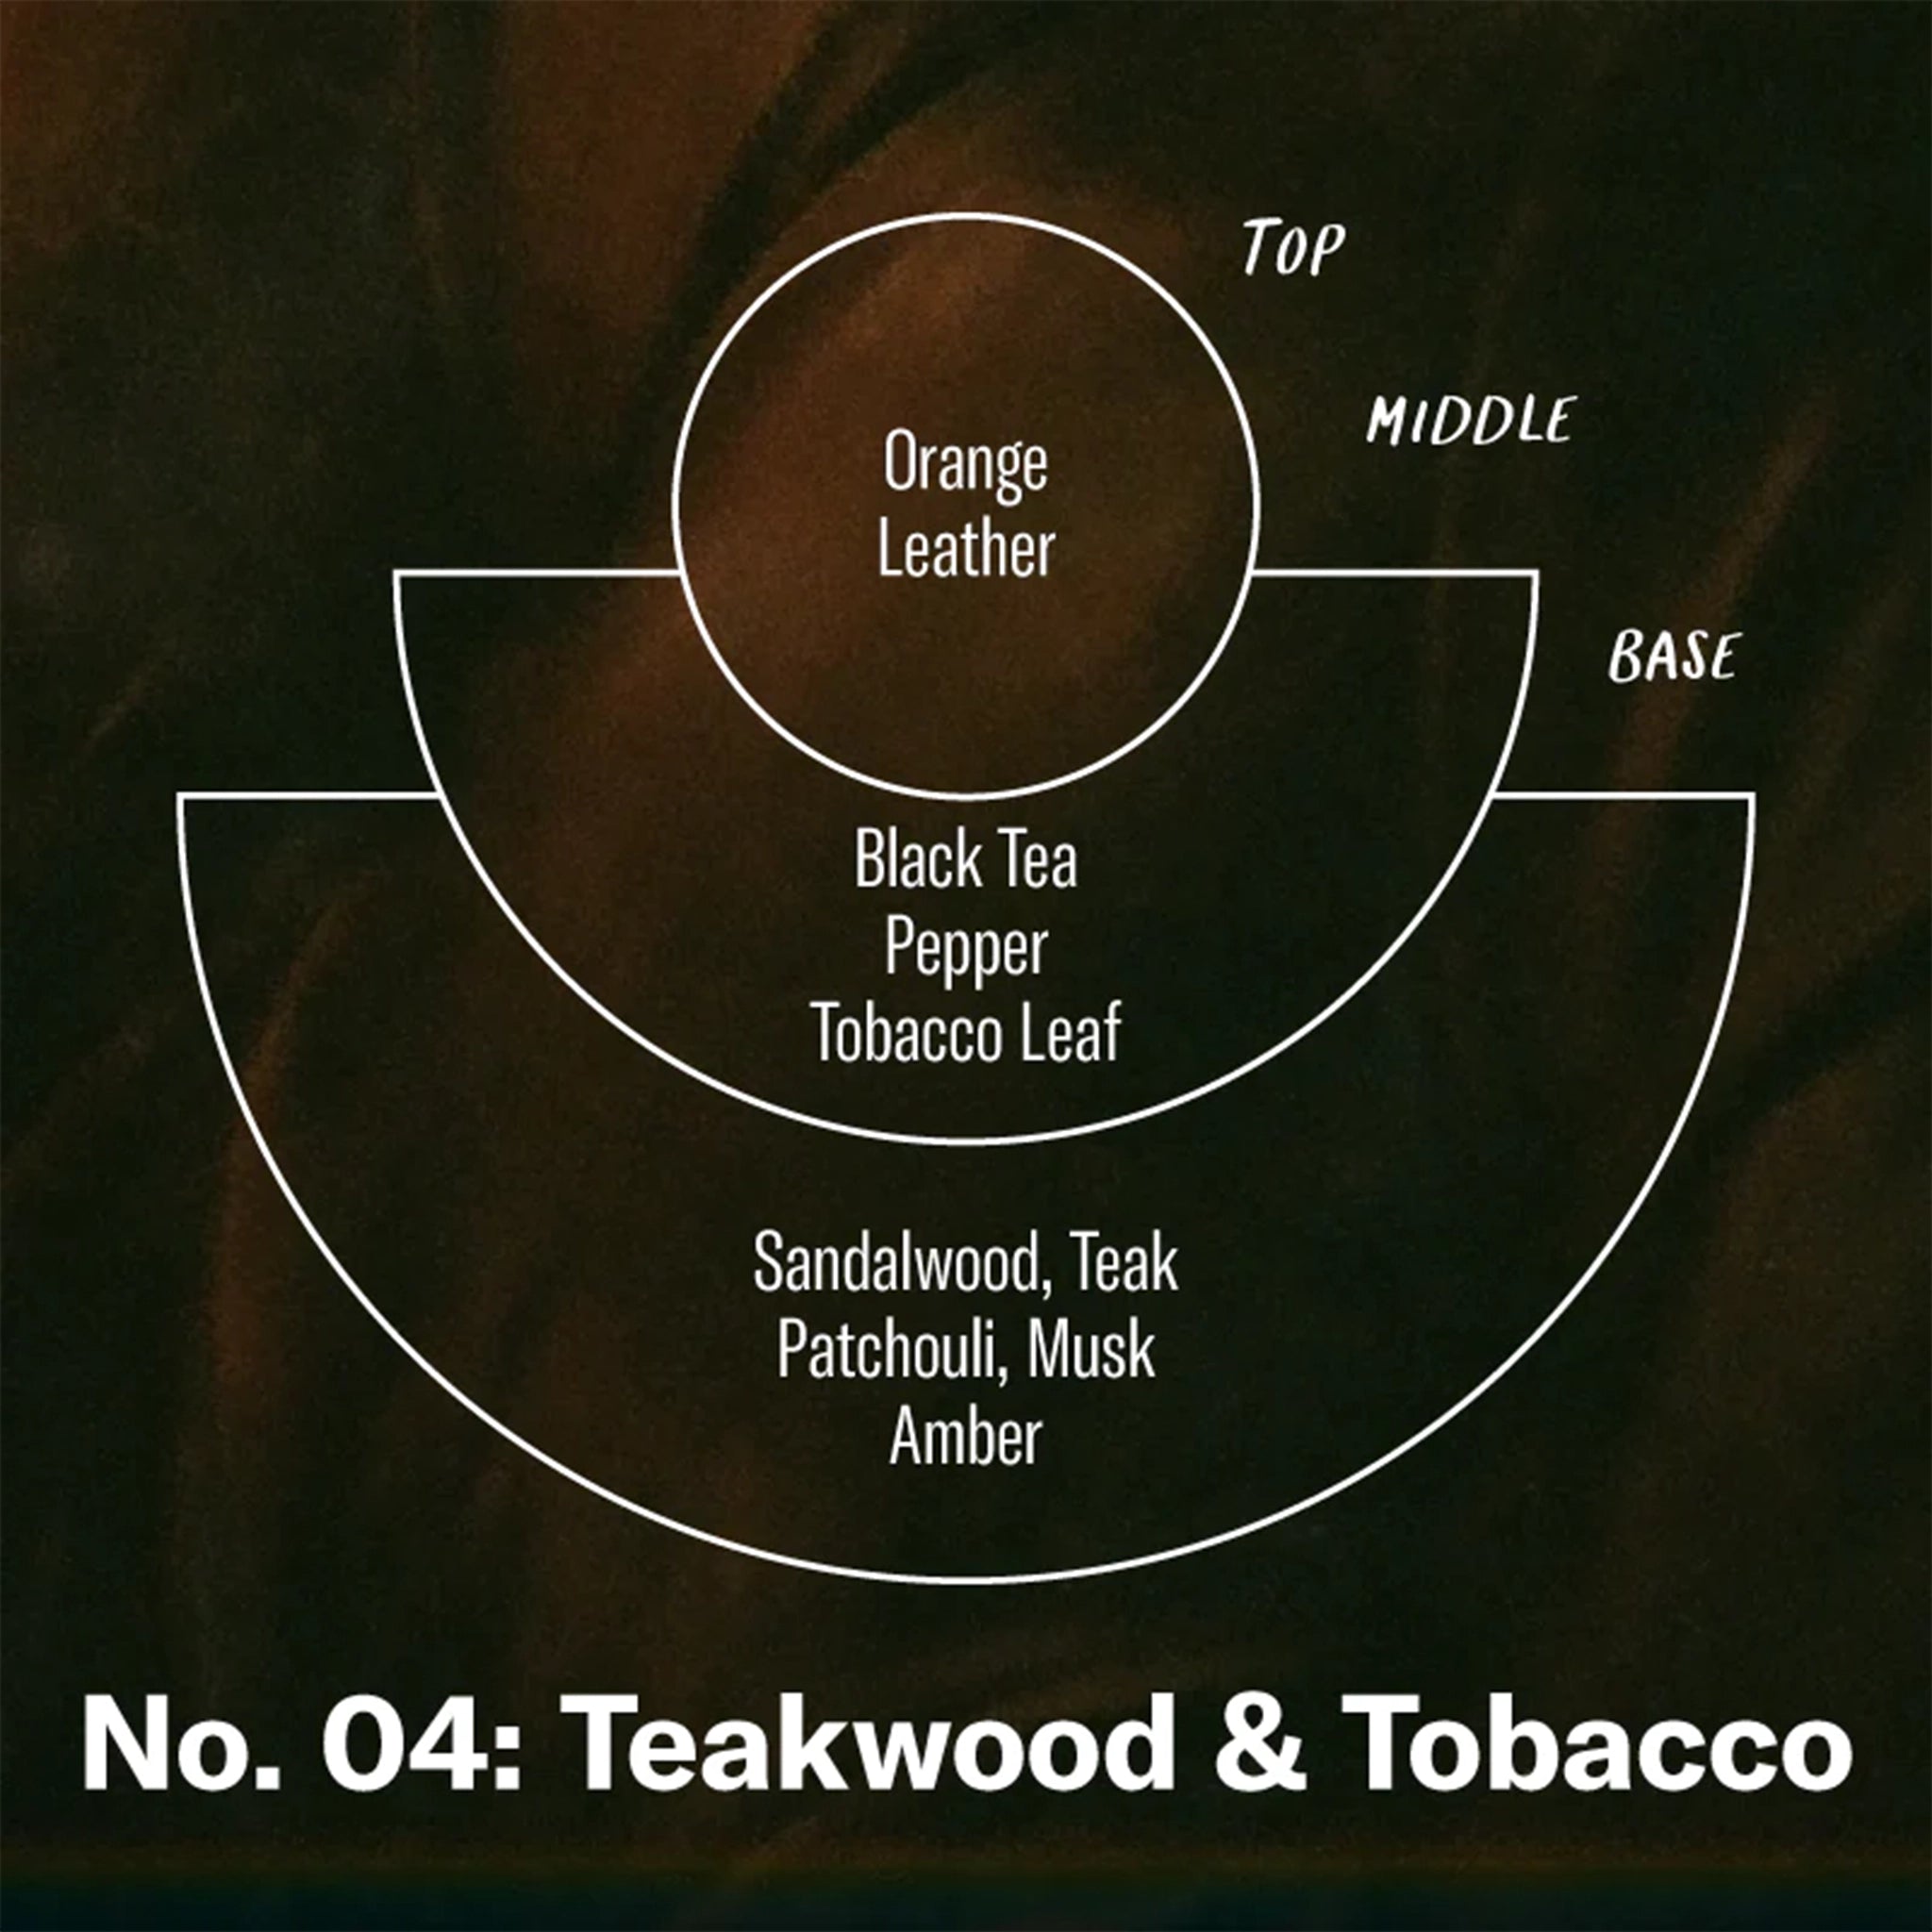 A layered diagram showing the notes of the incense, it lists Orange Leather as the top note, Black Tea, Pepper and Tobacco leaf as the middle notes and Sandalwood, Teak, Patchouli, Musk and Amber as the base notes.